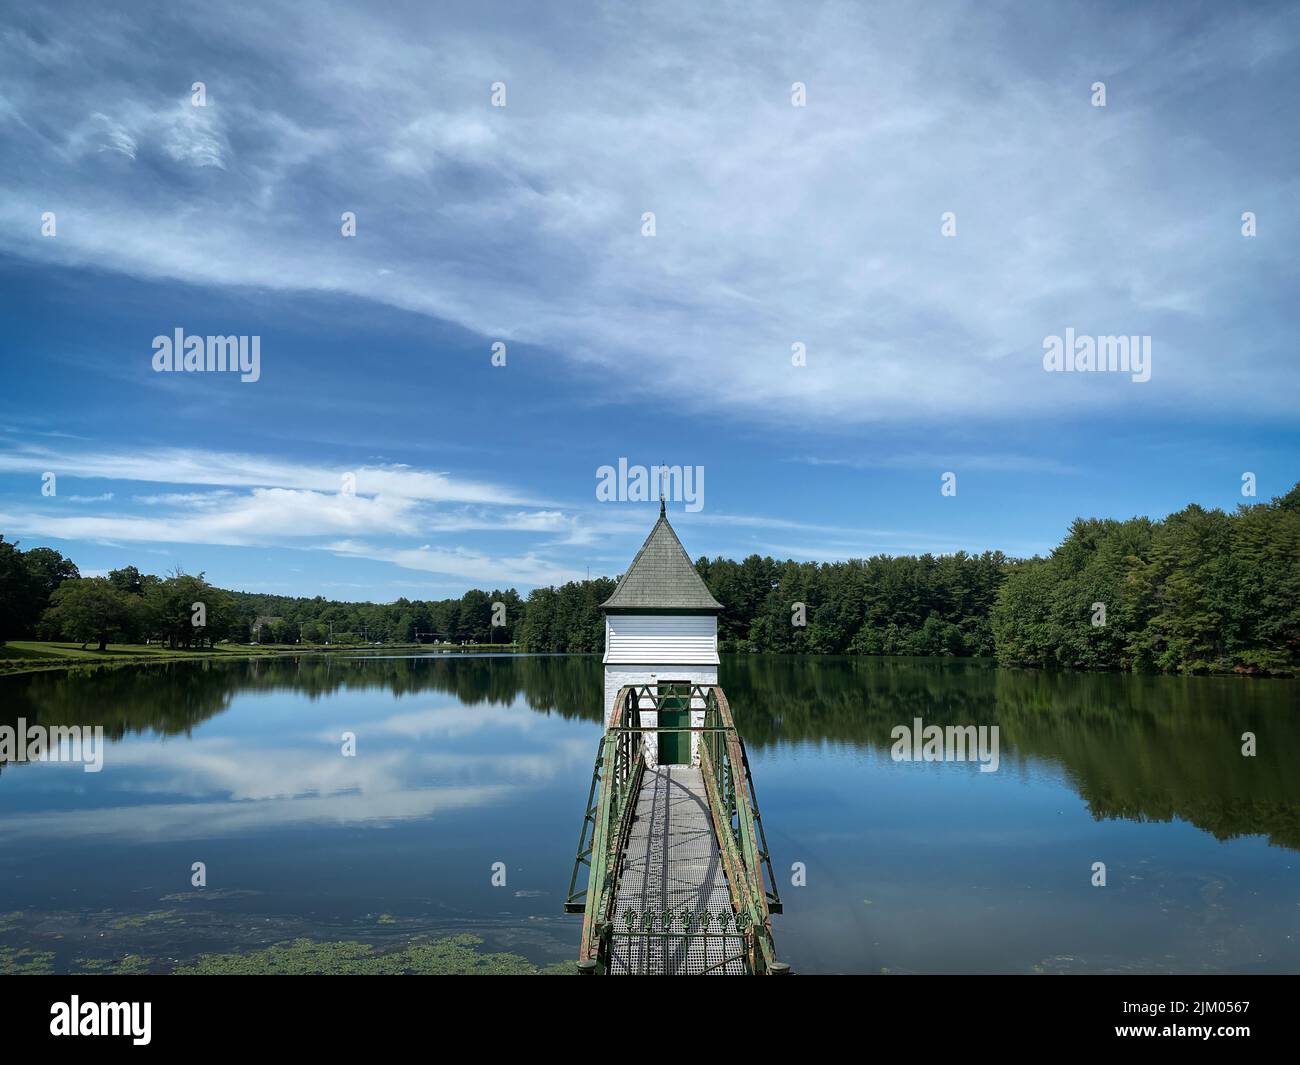 A Gatehouse Bridge in West Hartford Reservoir surrounded by water and trees, Connecticut, USA Stock Photo